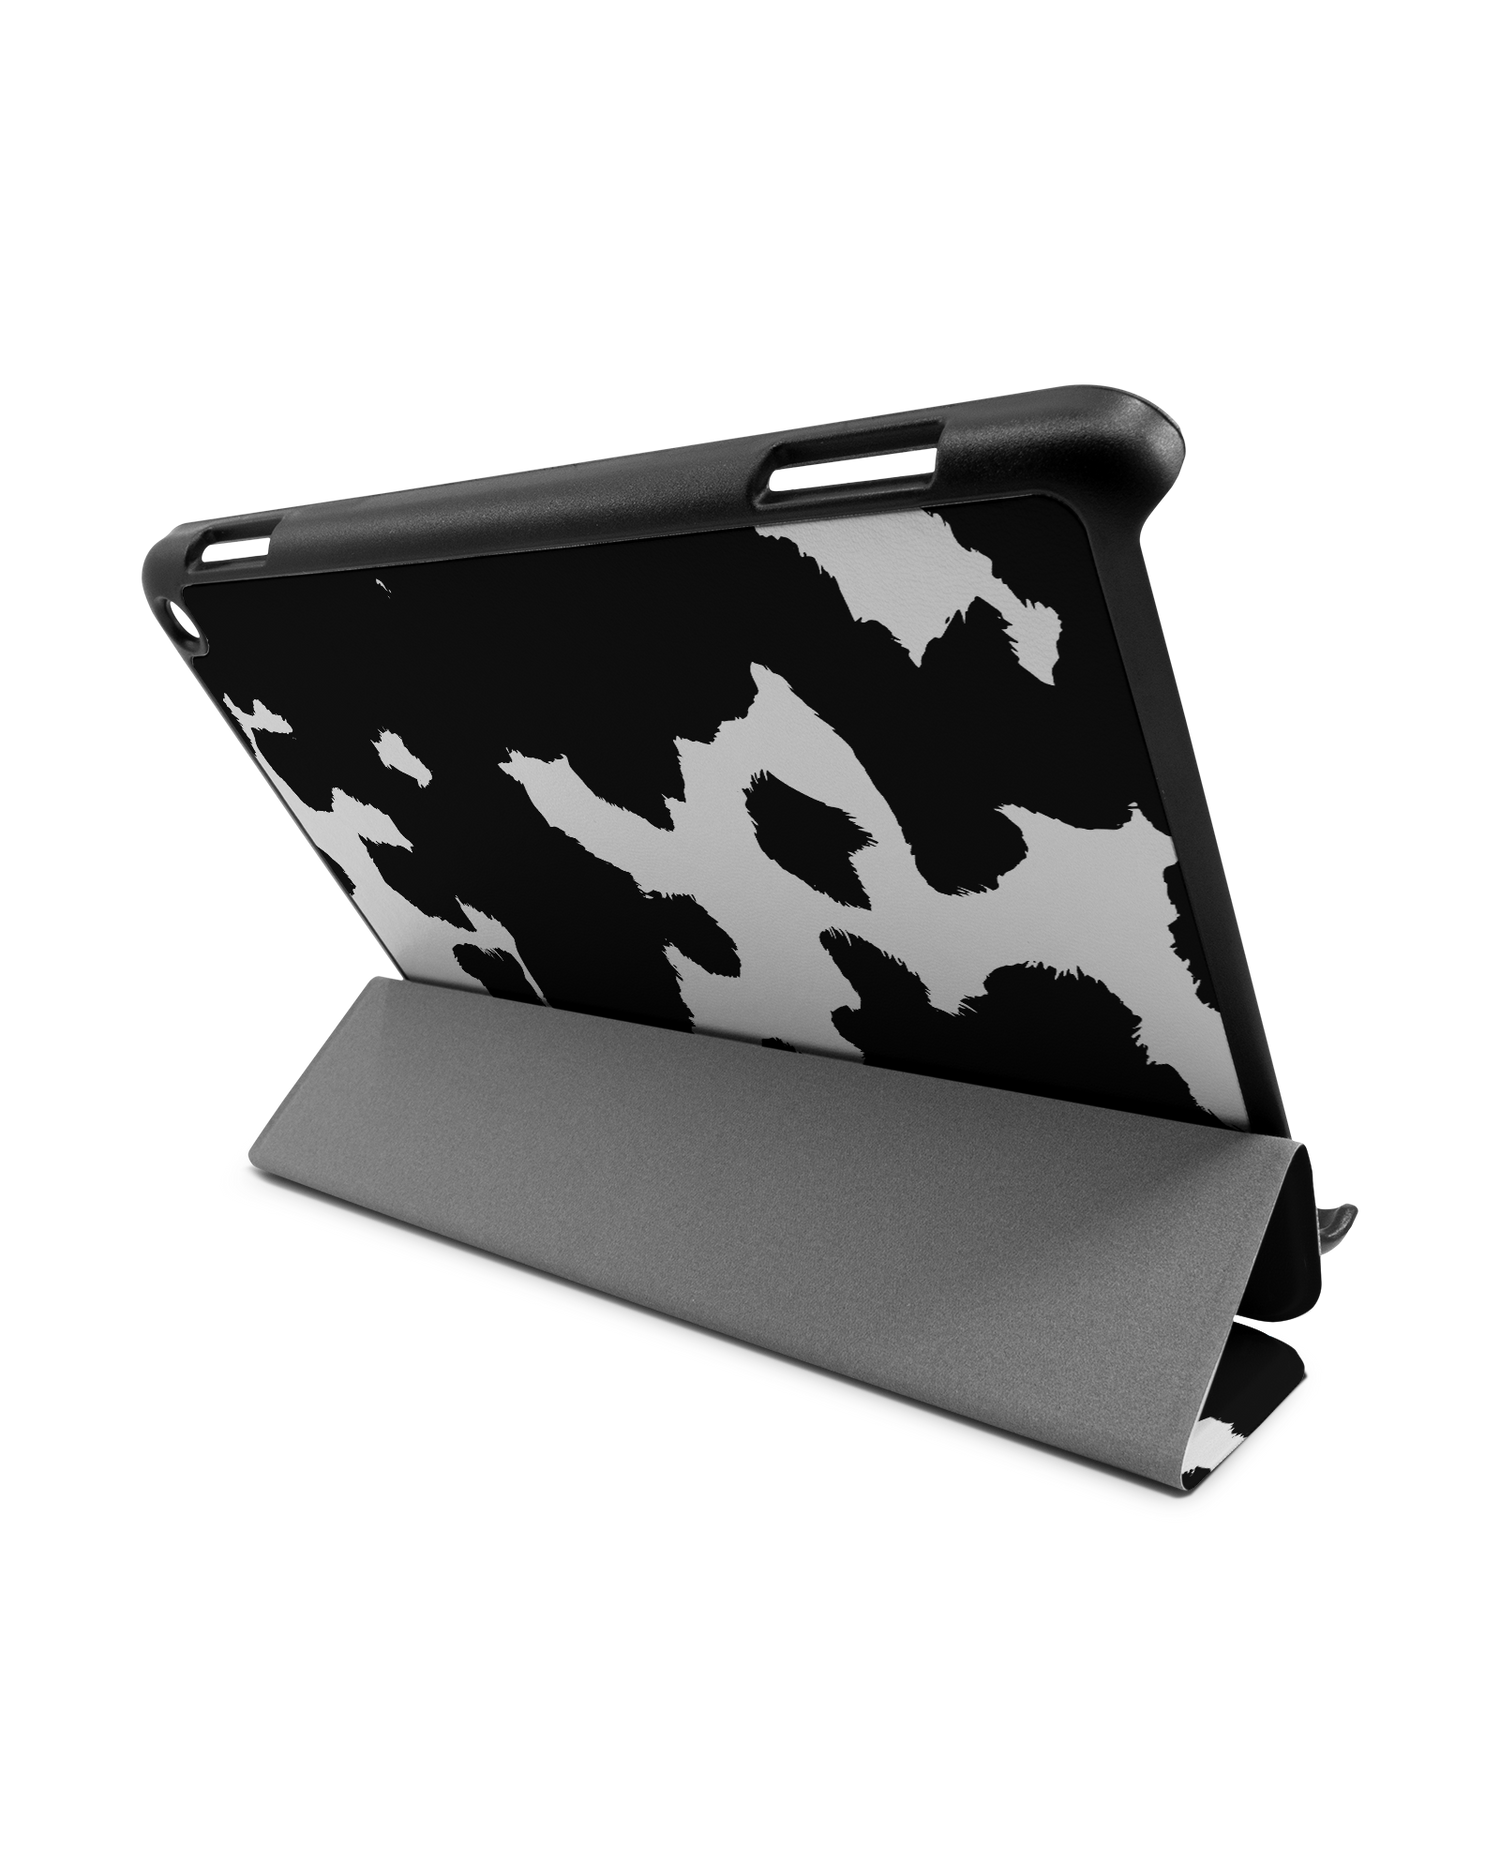 Cow Print Tablet Smart Case for Amazon Fire HD 8 (2022), Amazon Fire HD 8 Plus (2022), Amazon Fire HD 8 (2020), Amazon Fire HD 8 Plus (2020): Used as Stand